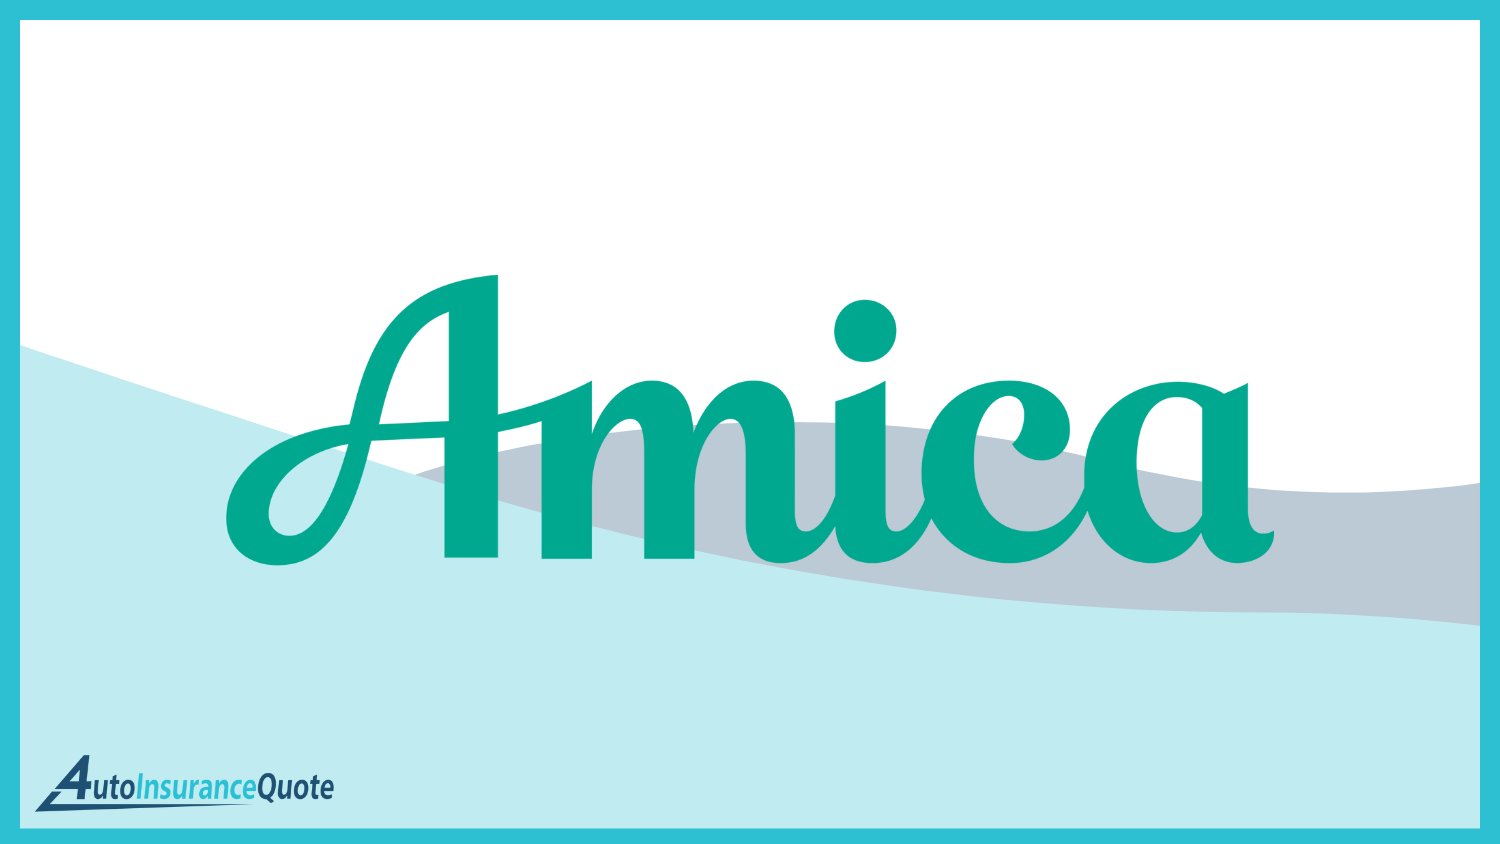 Best Auto Insurance for Undocumented Immigrants: Amica